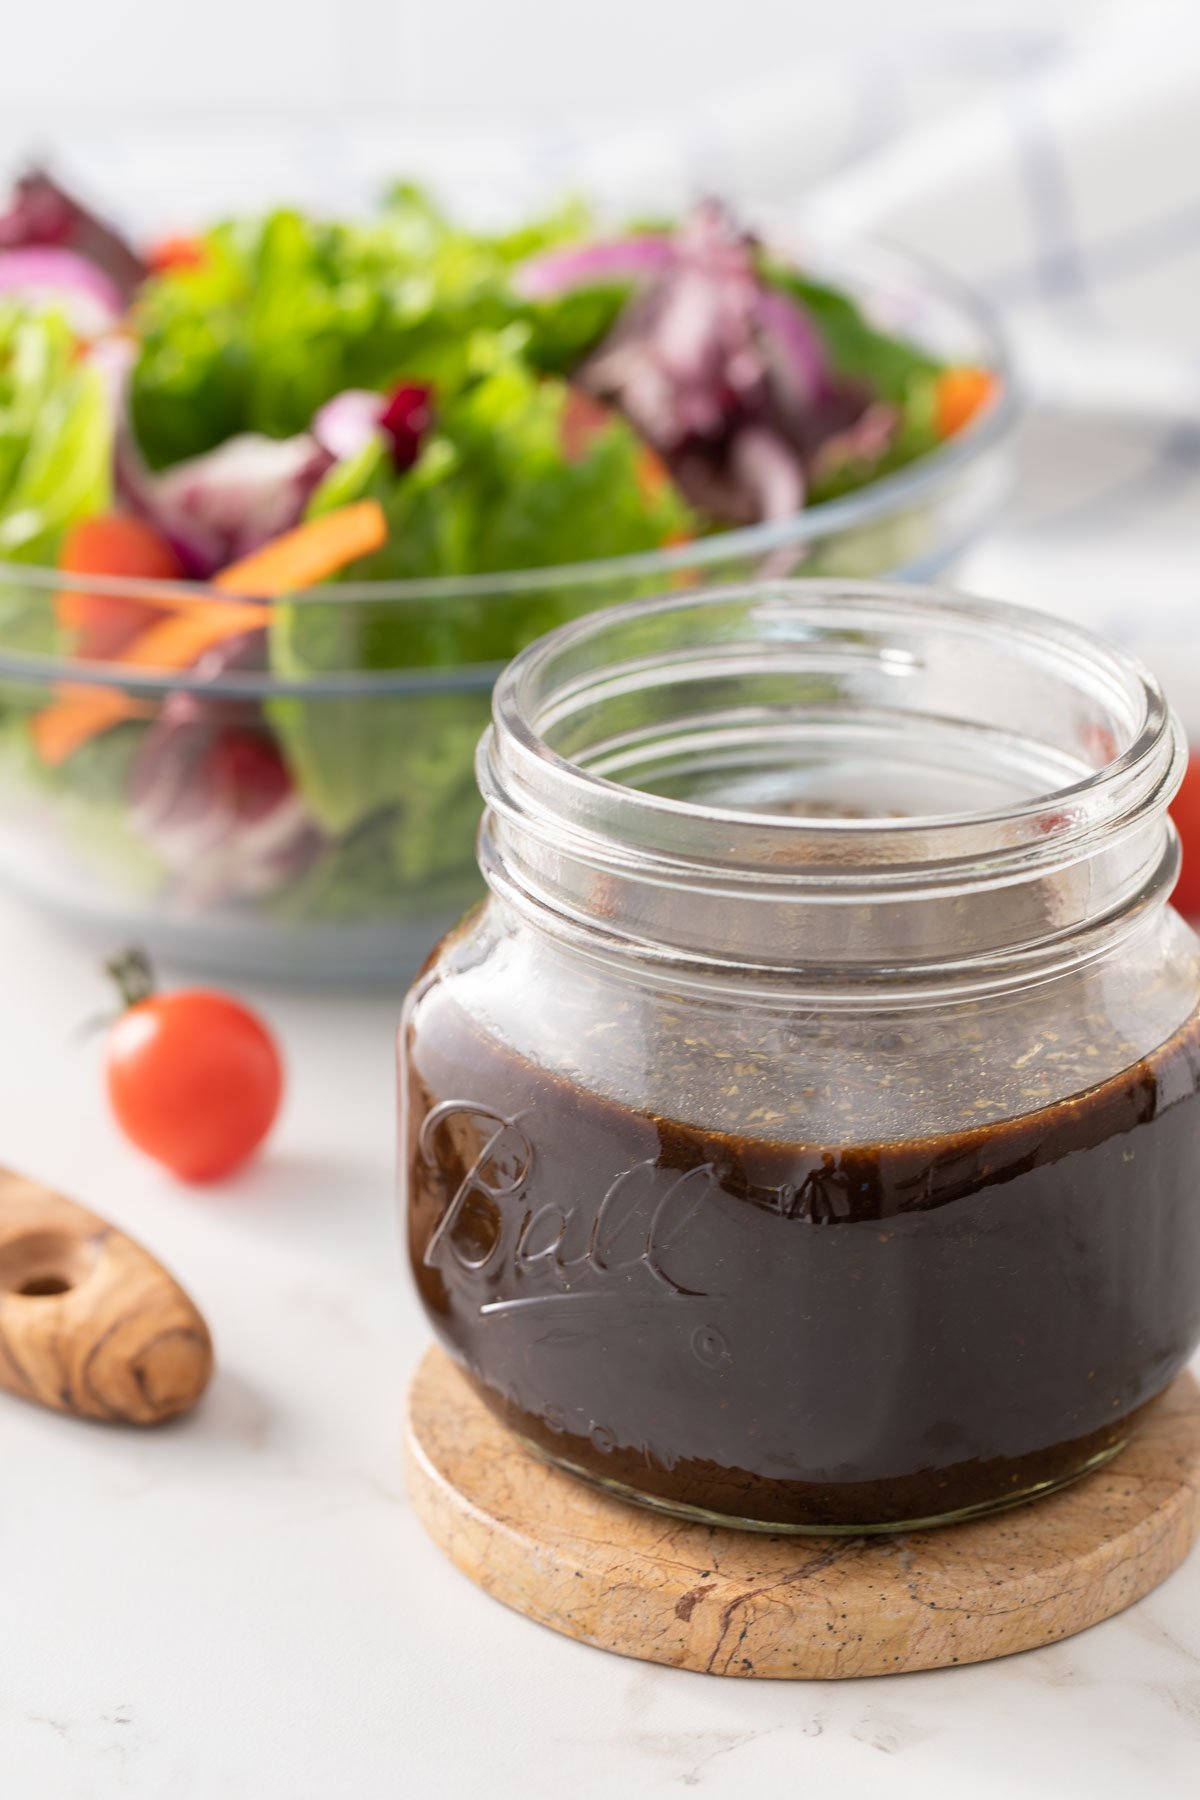 Homemade balsamic vinaigrette in a jar with a garden salad in the background.